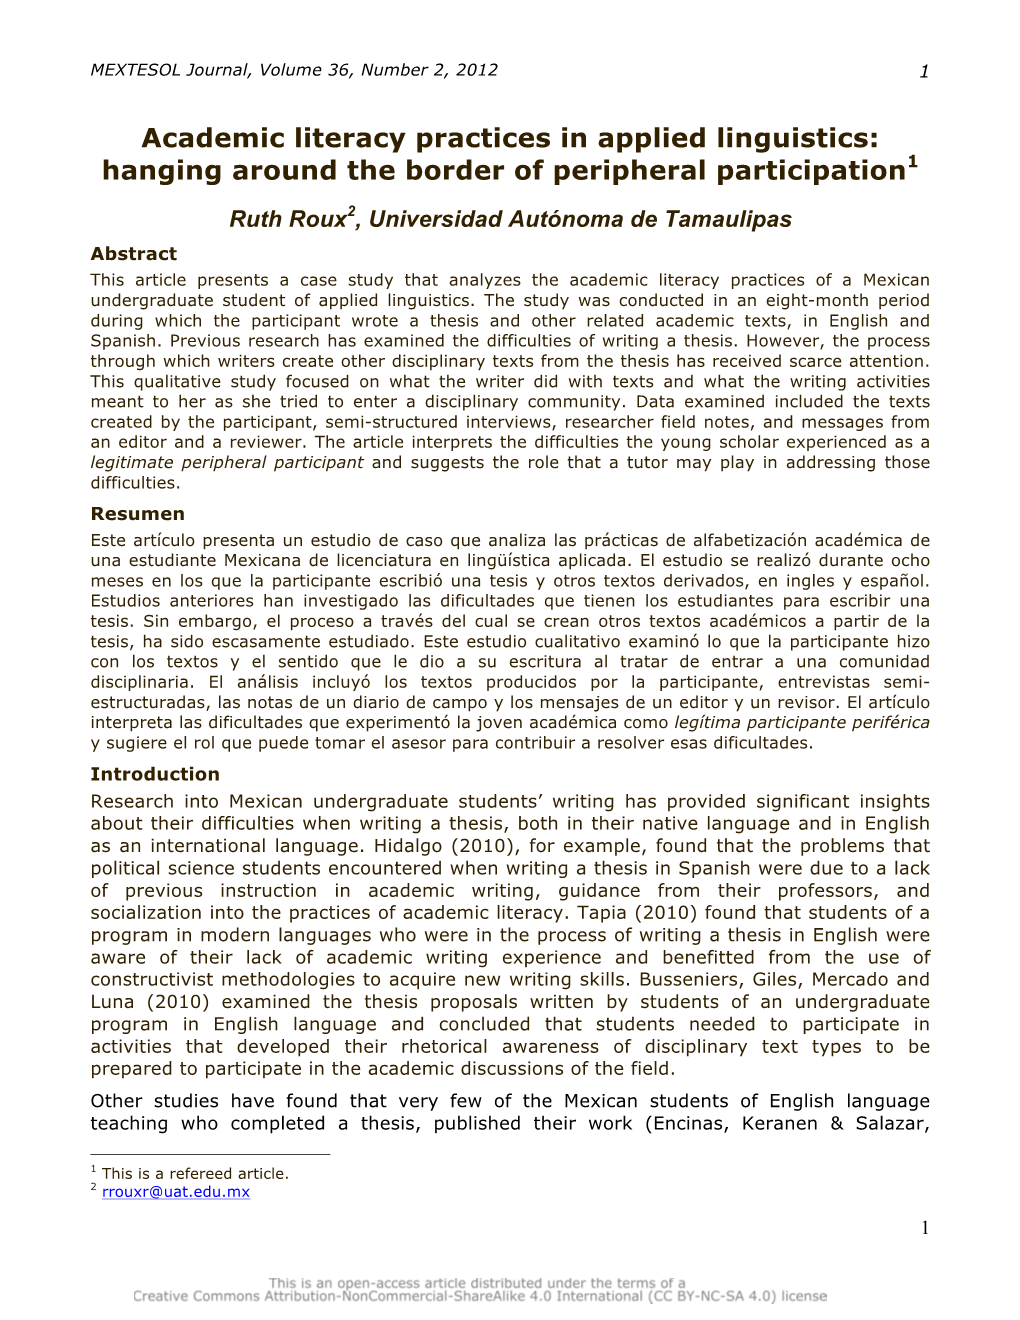 Academic Literacy Practices in Applied Linguistics: Hanging Around the Border of Peripheral Participation1